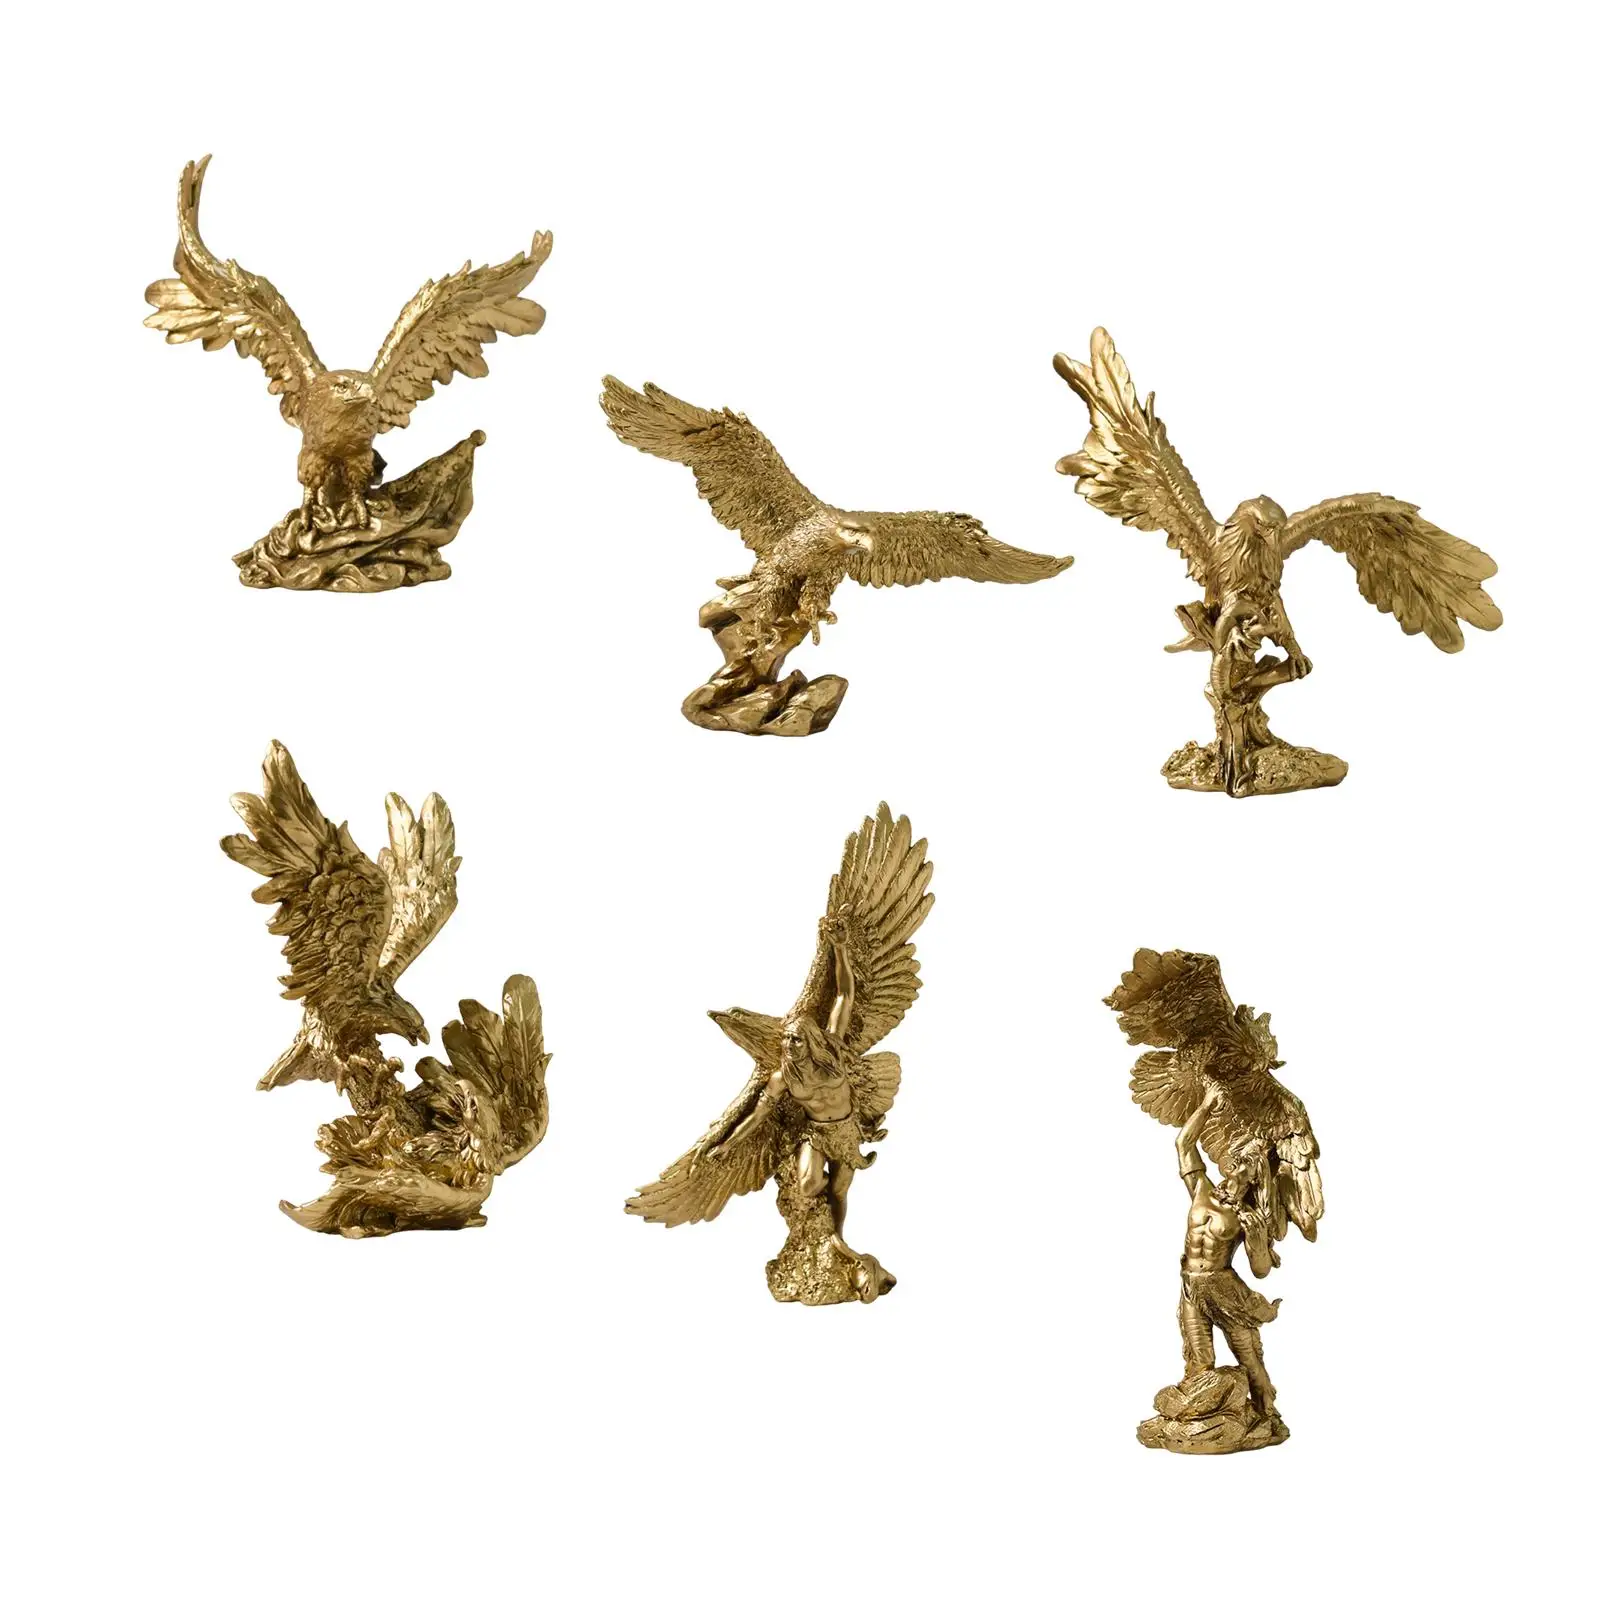 

American Eagle Sculptures Wild Bird Statue Polyresin Tabletop Centerpiece Decoration for Bookshelf and Shelf Accents Collection